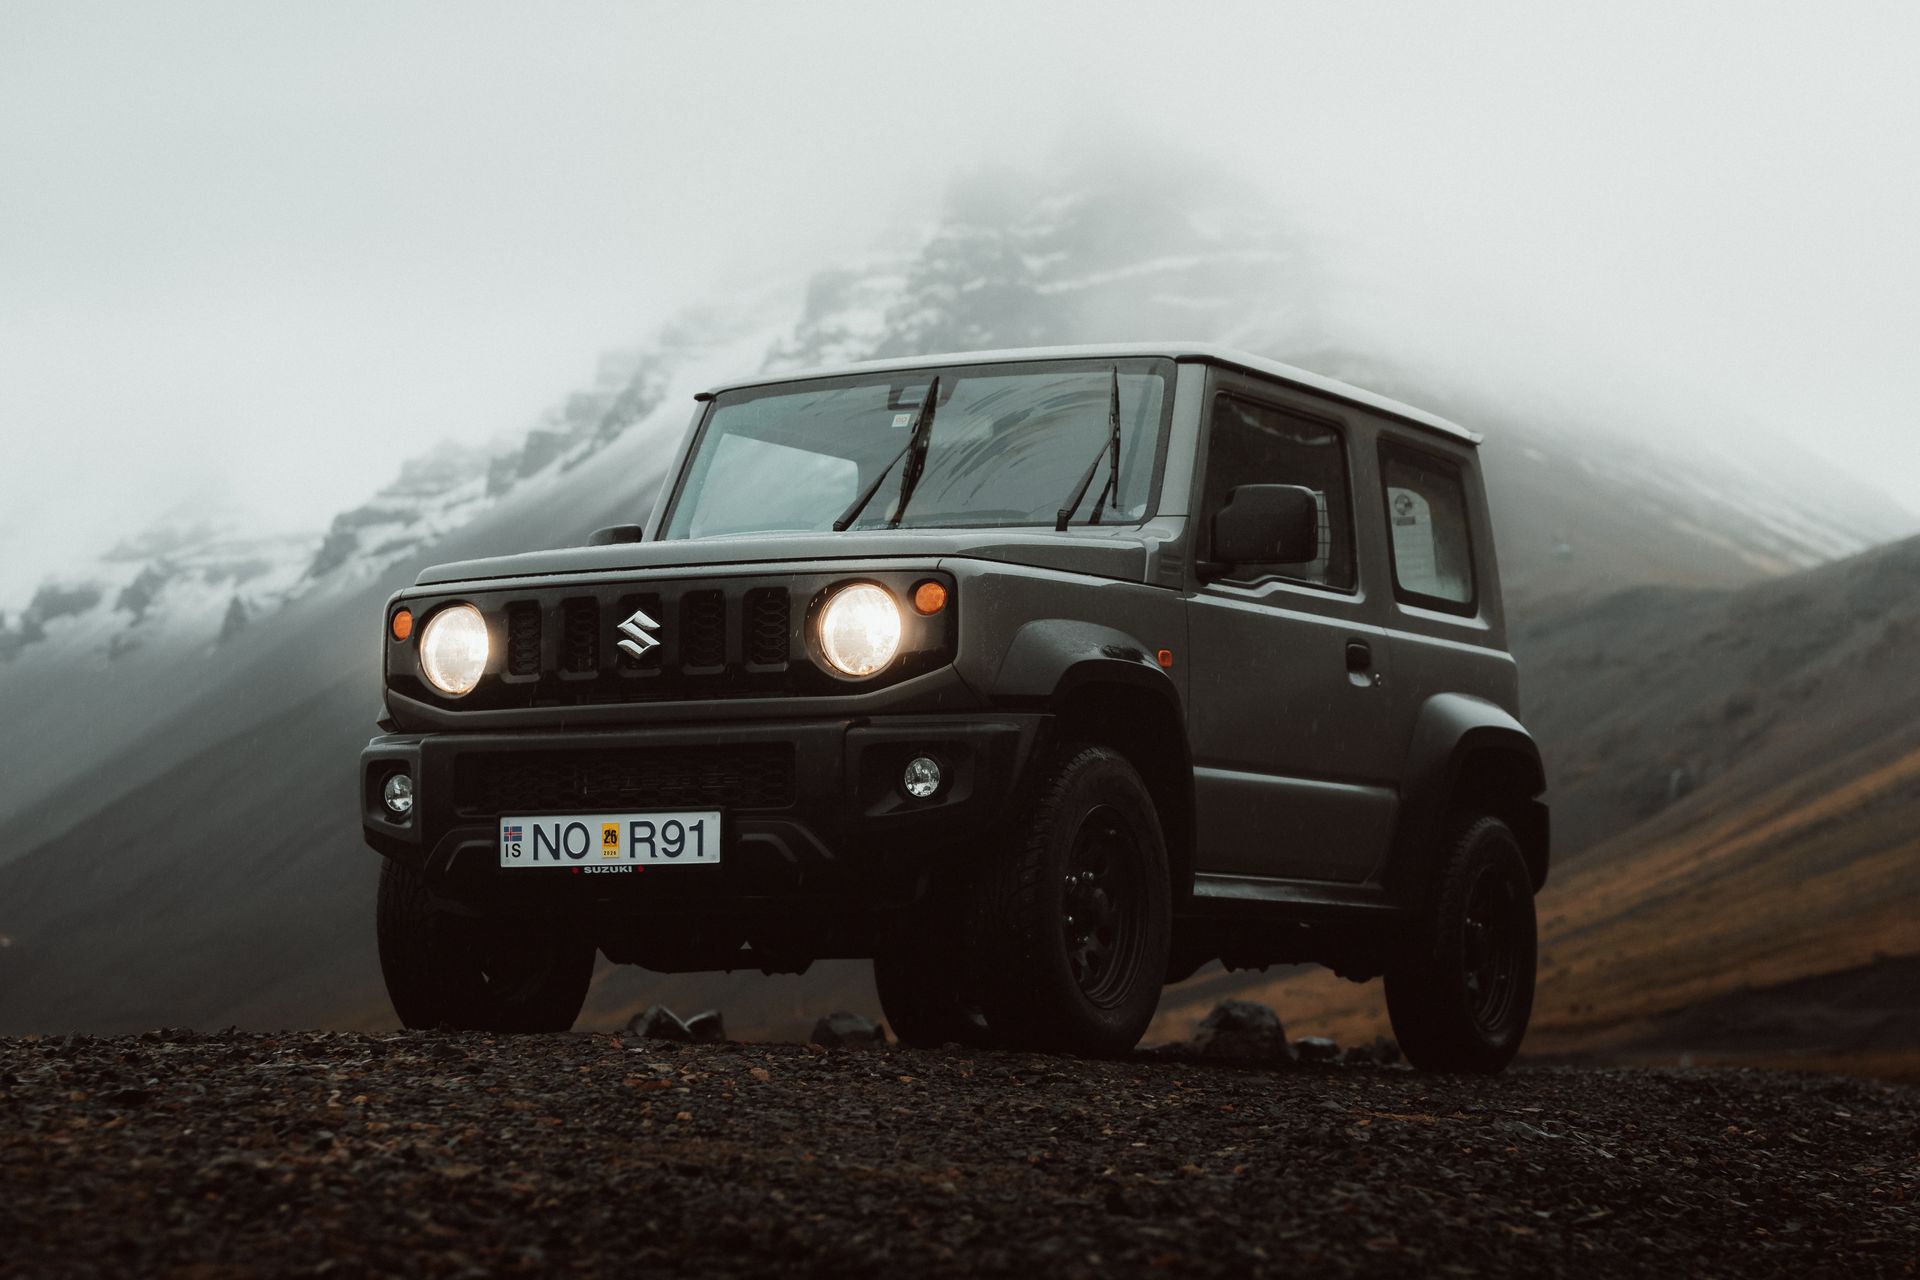 A parked Suzuki Jimny, ready for rental adventures in Iceland